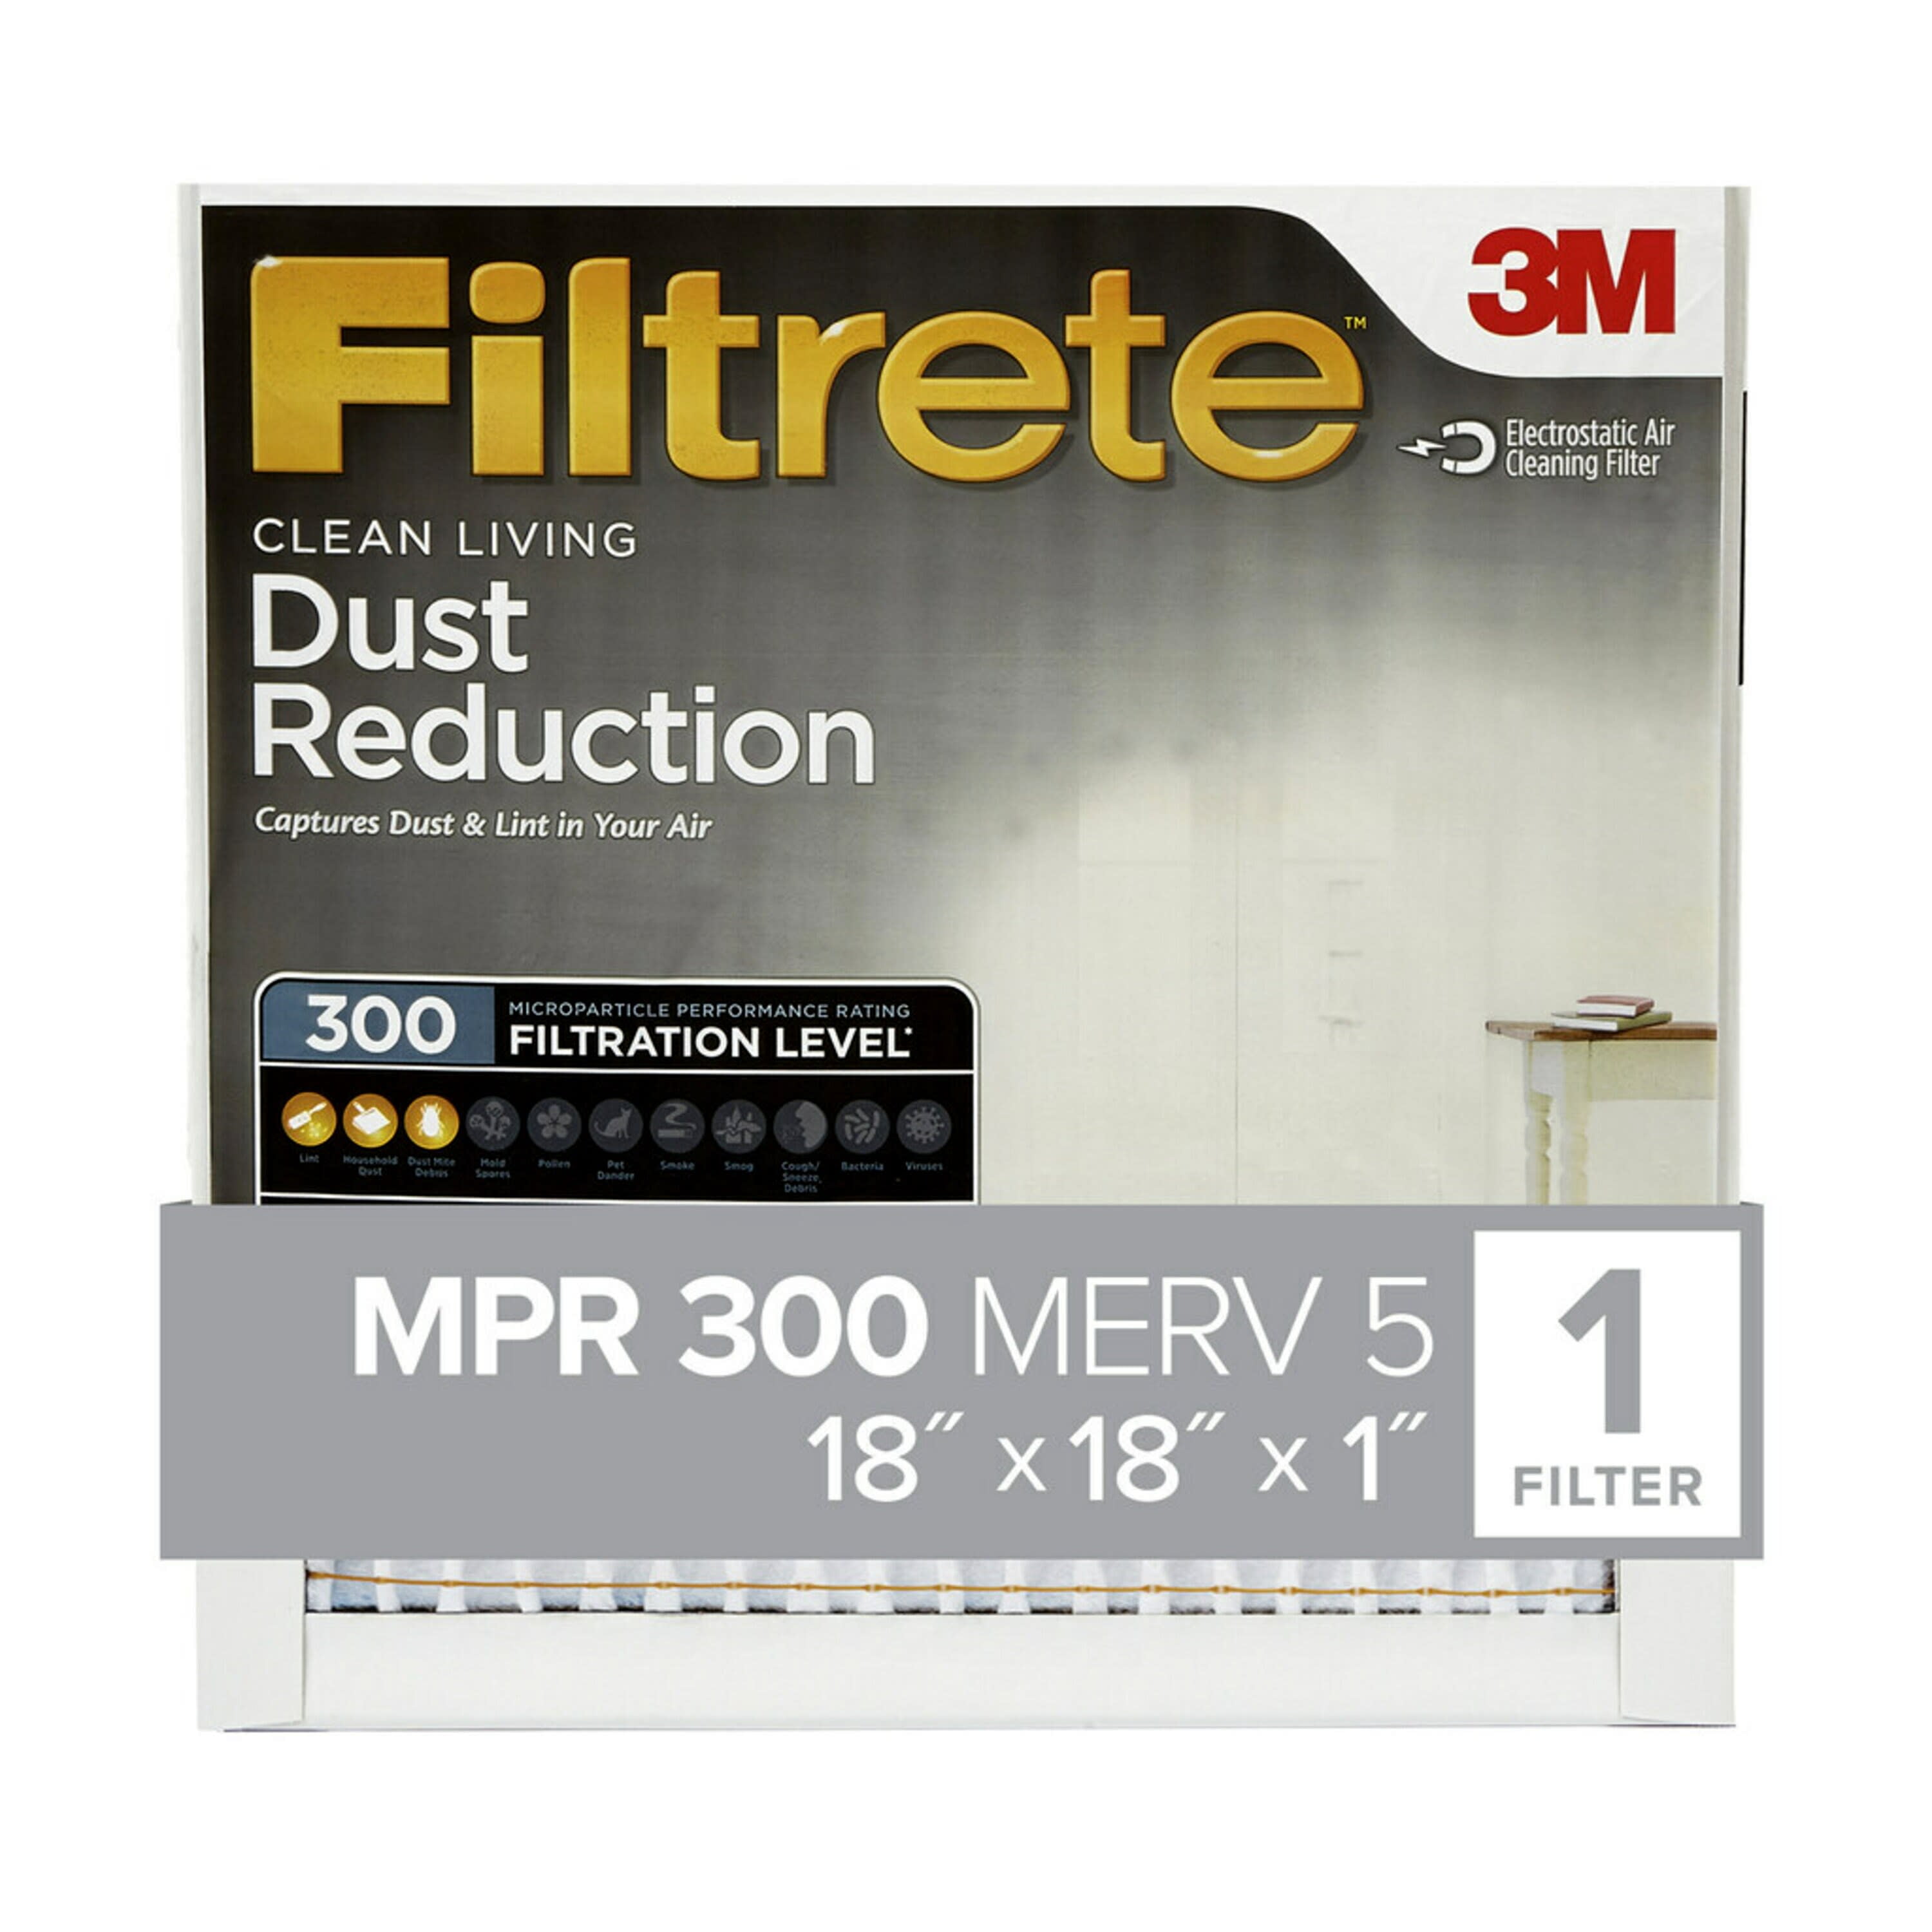 Picture of 3M 317DC-6 18 x 18 x 1 in. Filtrate Dust Reduction Filter